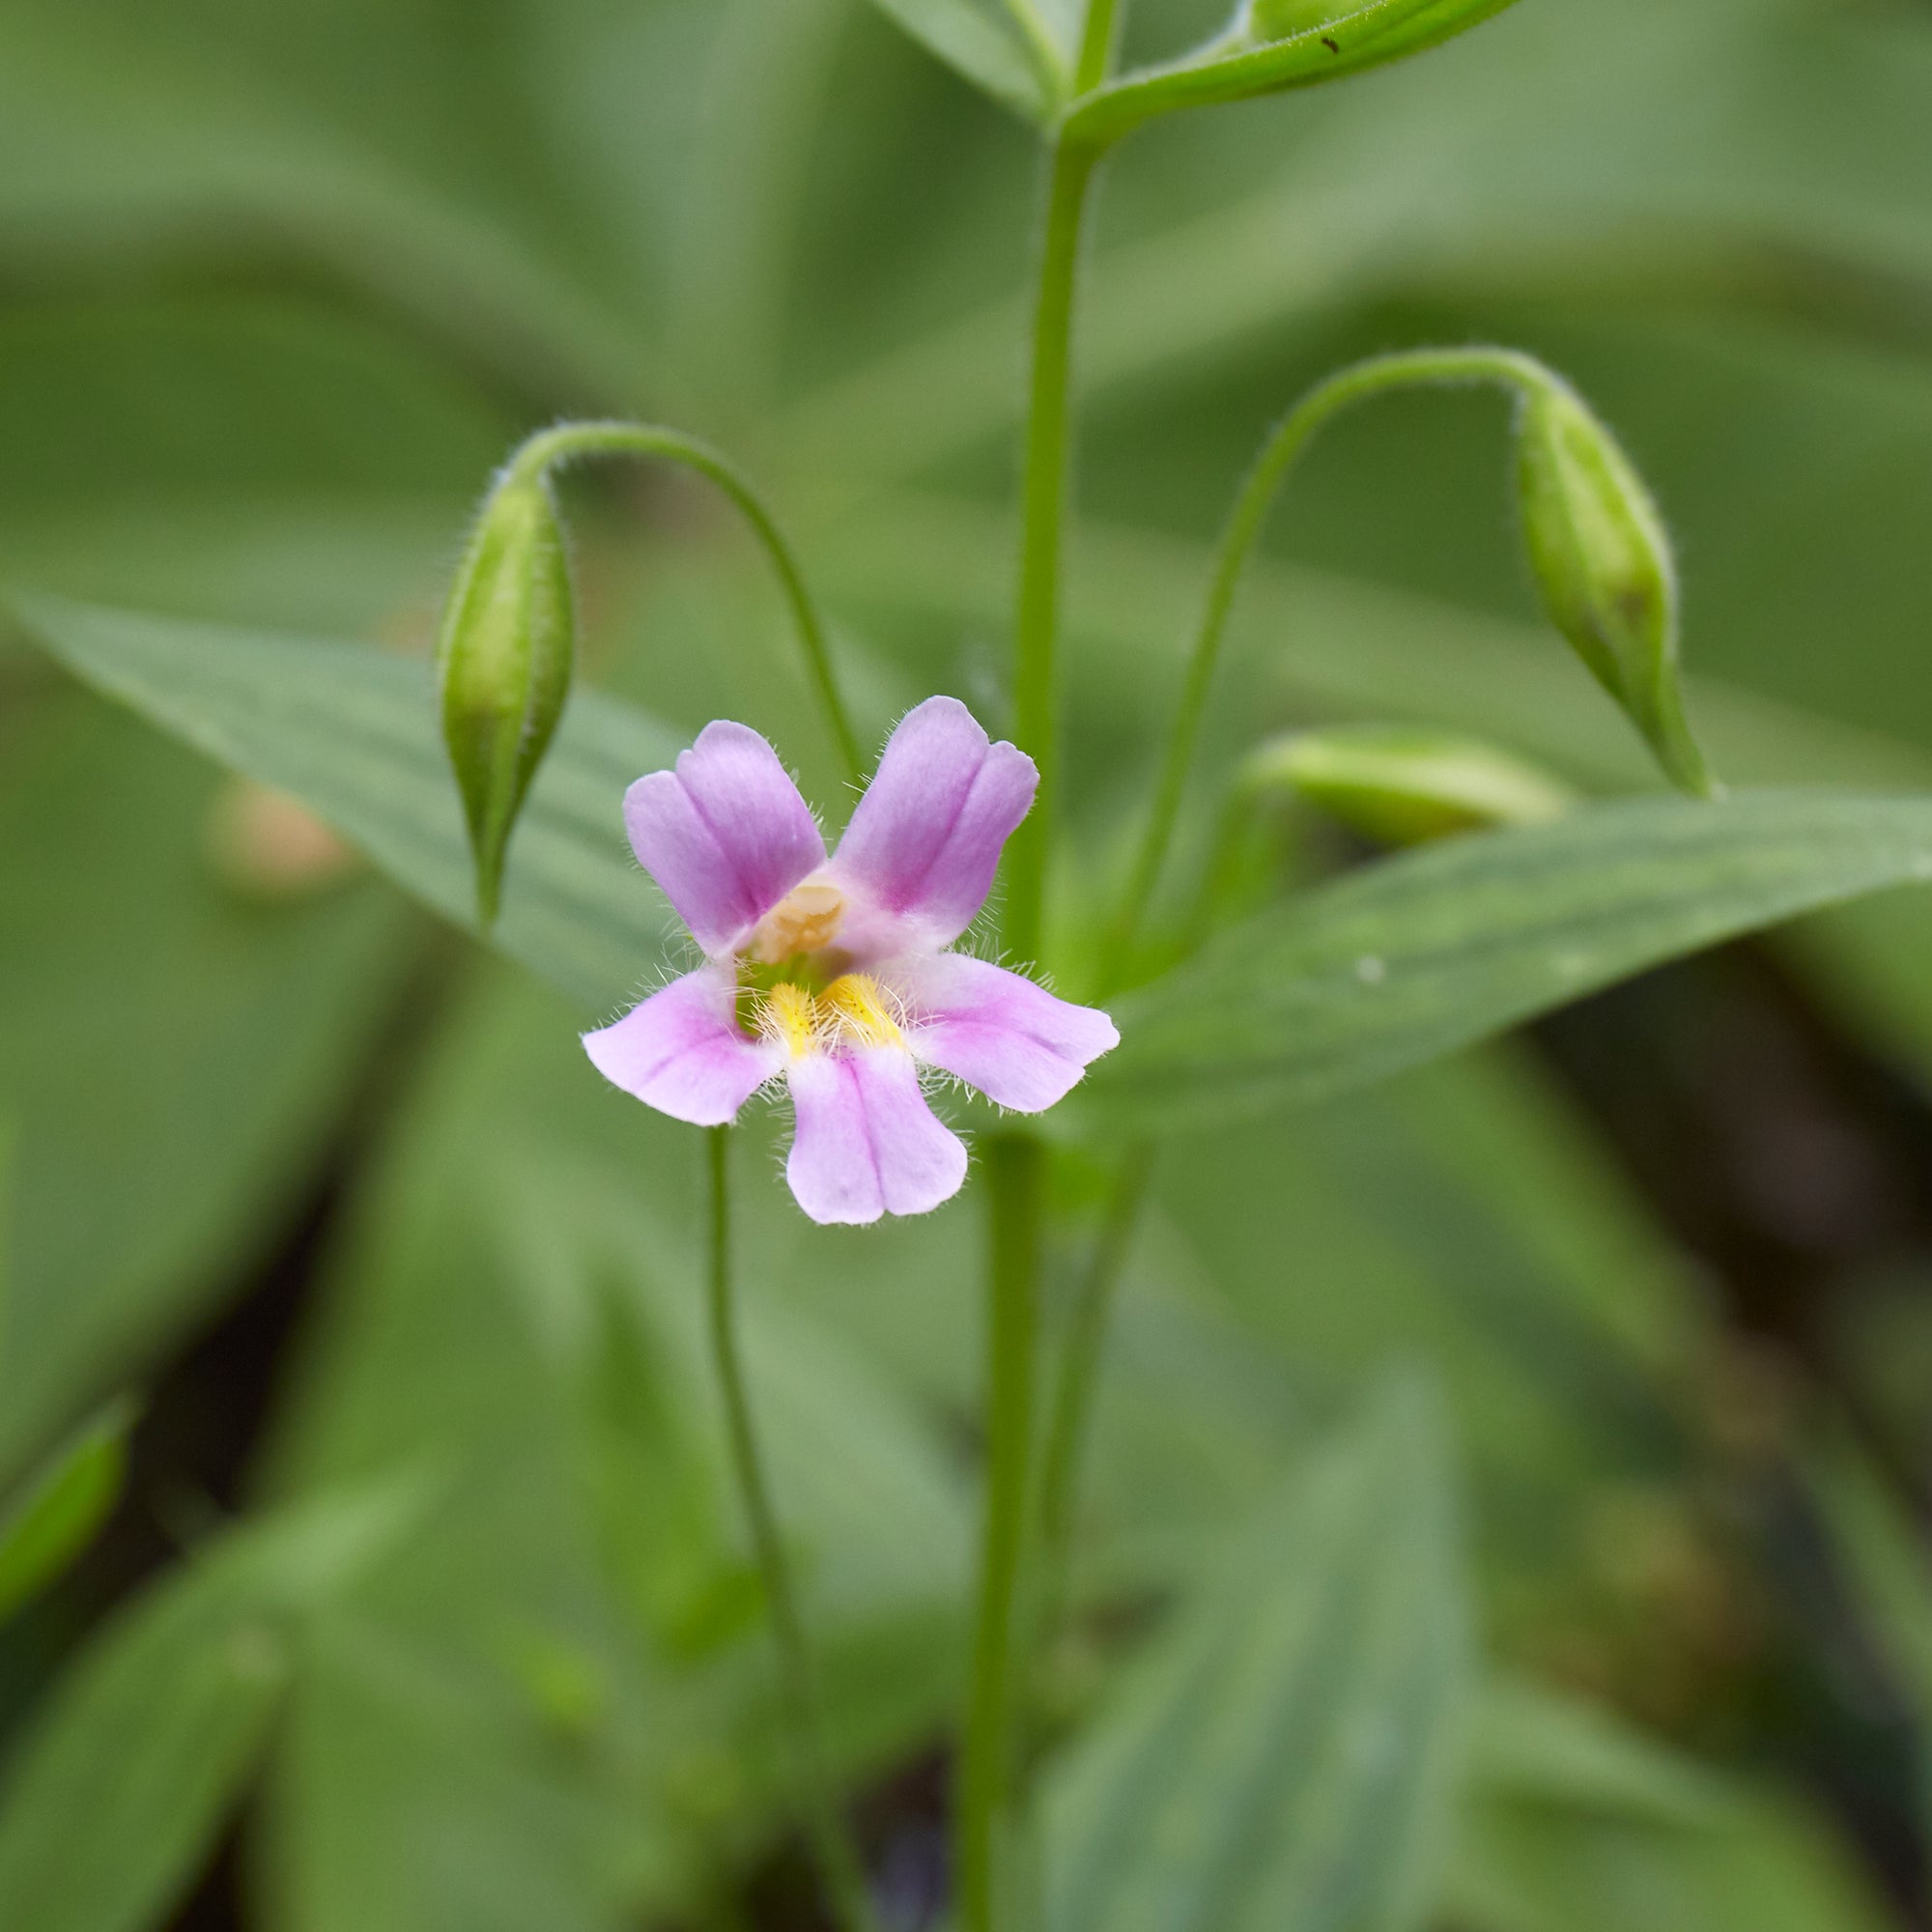 A green plant with long oval leaves and a single pink flower with a yellow center. The plant has 2 other buds.